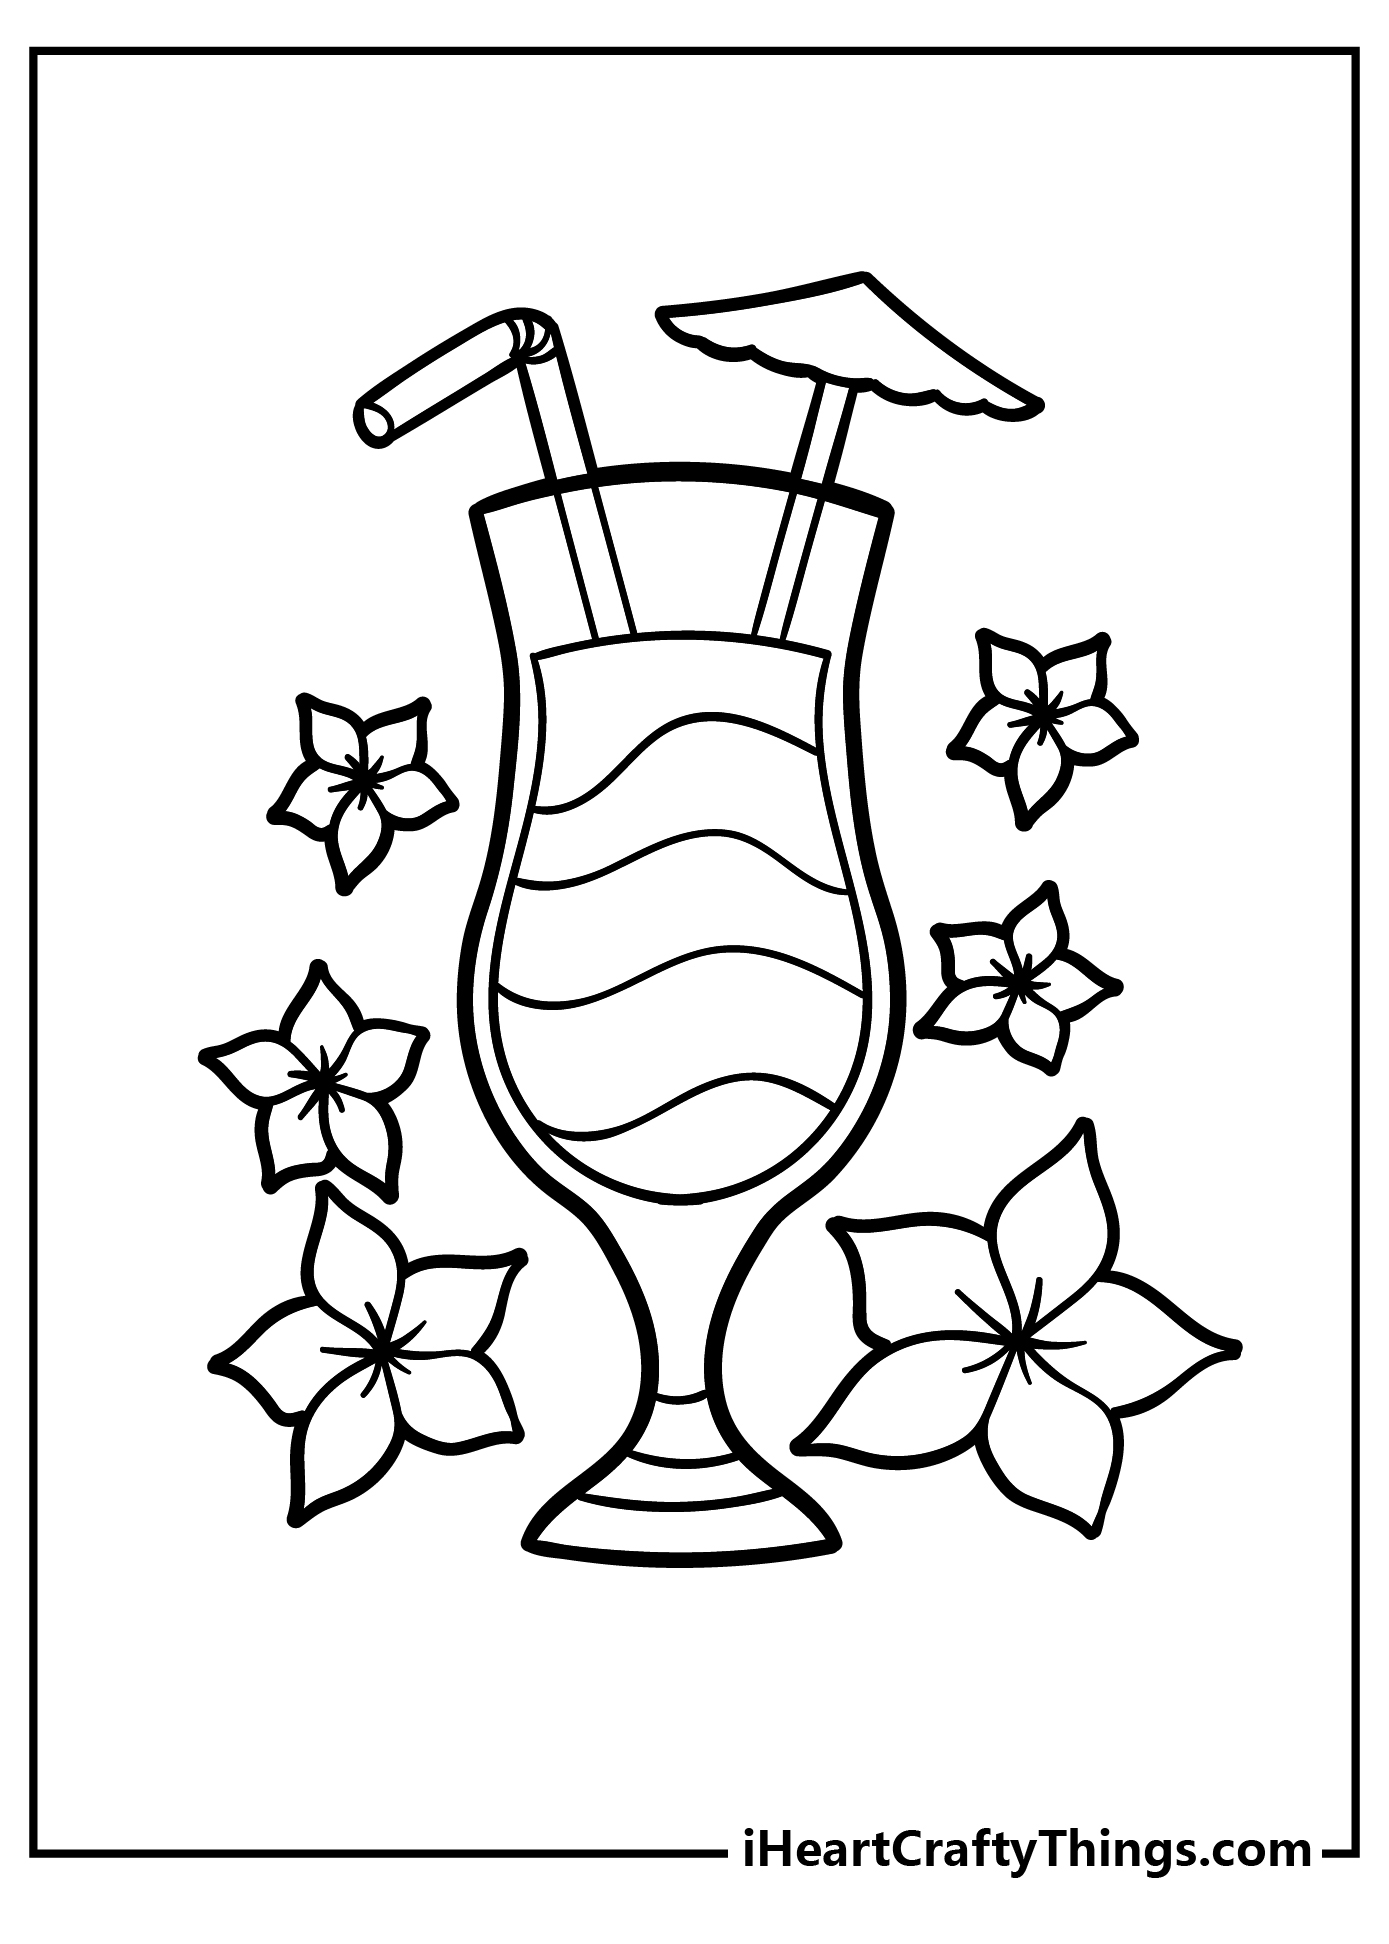 Tropical Coloring Pages free pdf download